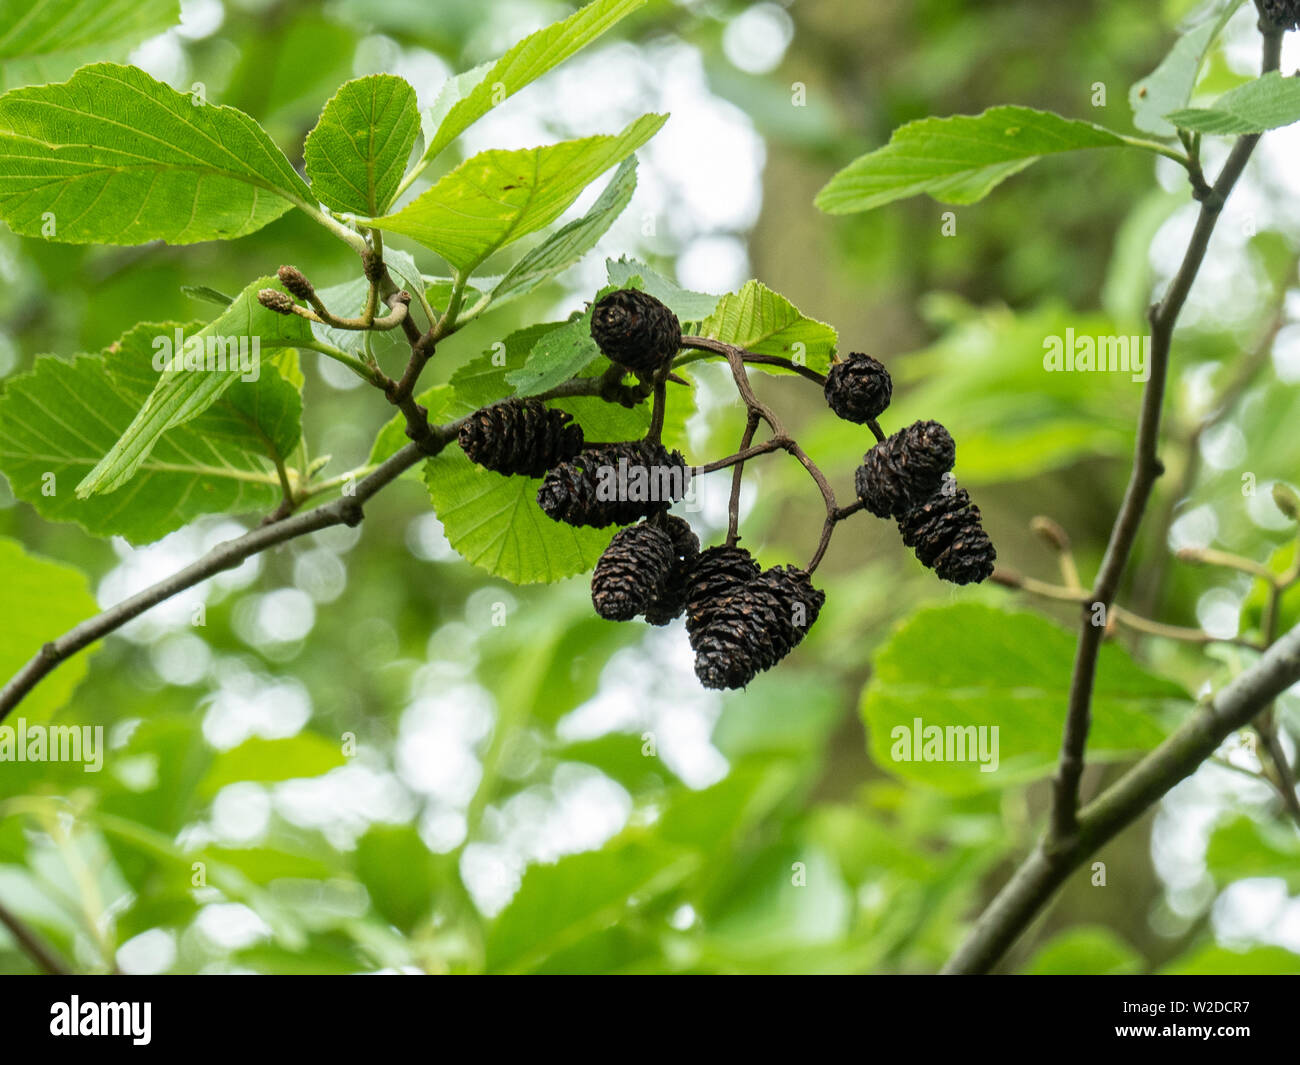 The black open catkins of the common alder Alnus glutinosa against a leafy background Stock Photo